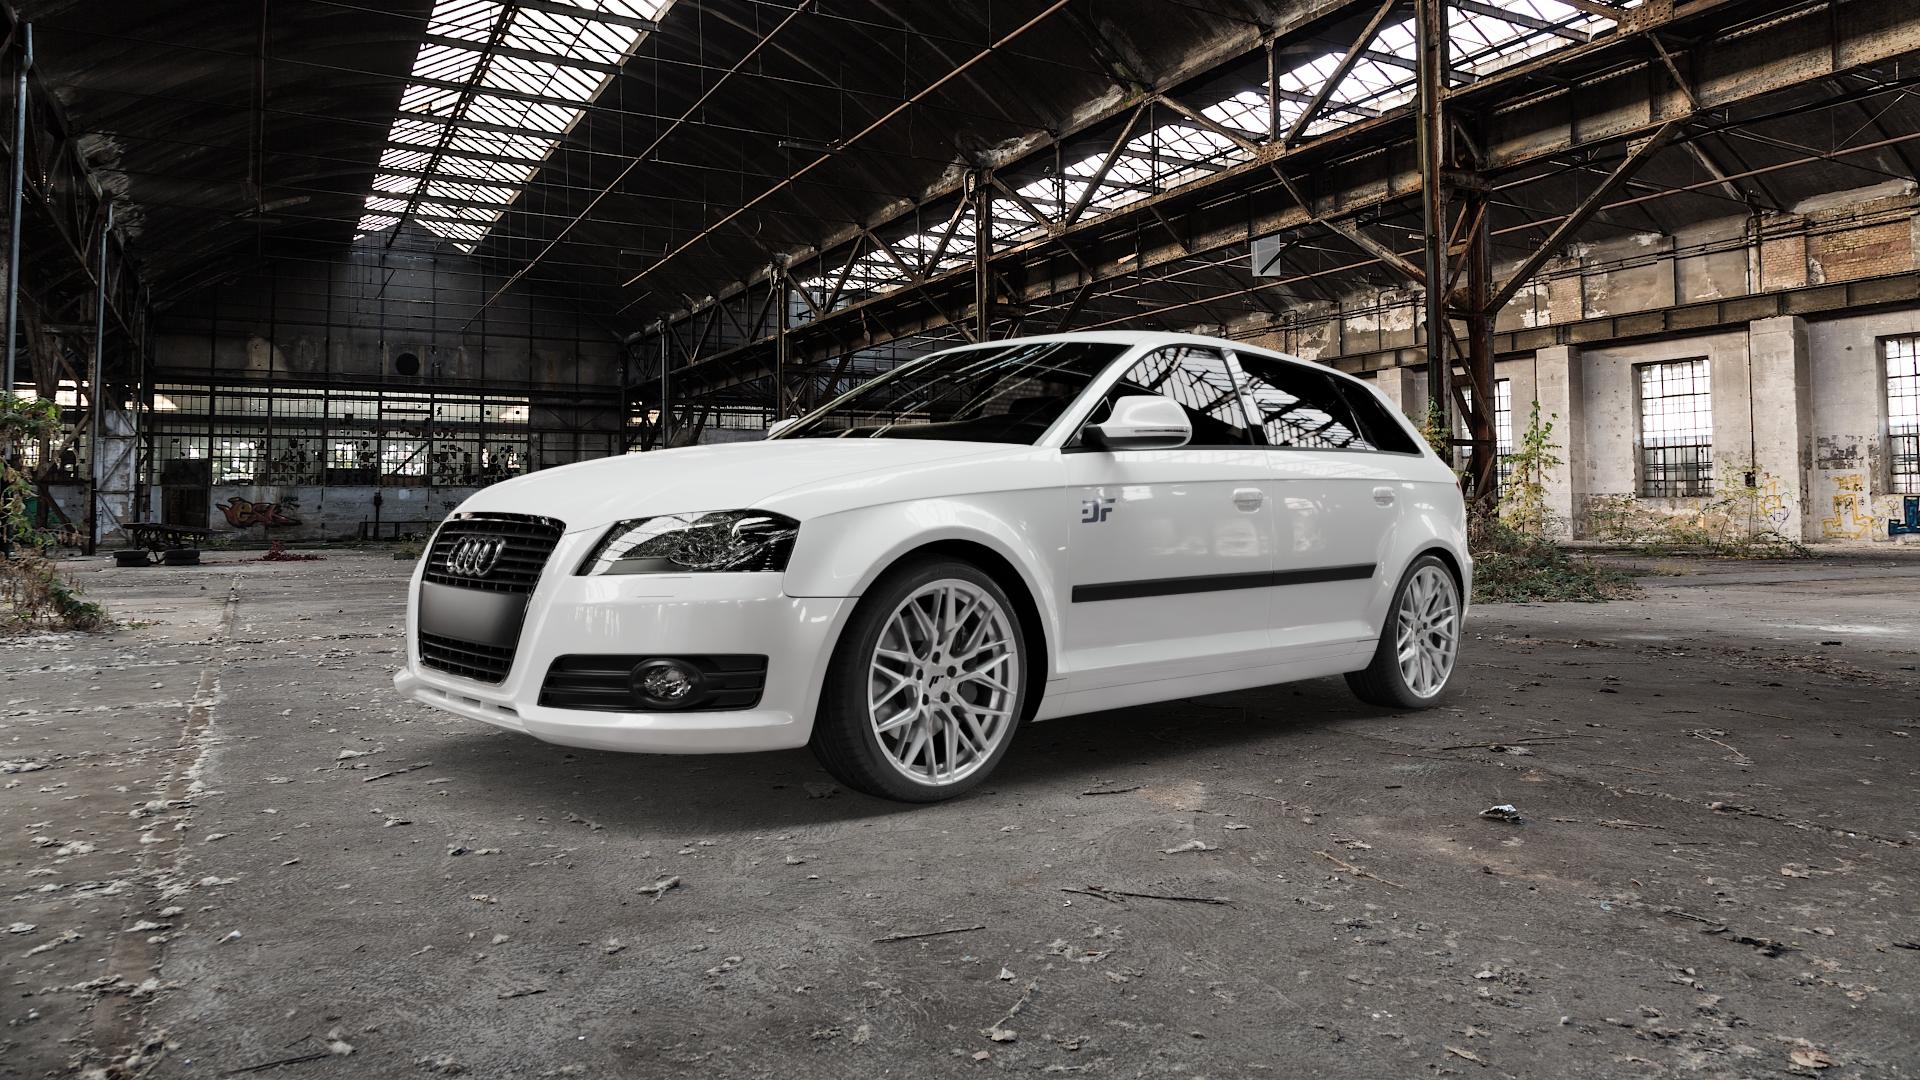 Japan Racing Wheels JR28 Silver Machined Face Felge mit Reifen silber in 18Zoll Alufelge auf weissem Audi A3 Typ 8P (Sportback) 1,6l 75kW (102 PS) 2,0l FSI 110kW (150 1,9l TDI 77kW (105 103kW (140 TFSI 147kW (200 85kW (116 100kW (136 1,8l 118kW (160 125kW (170 1,4l 92kW (1 ⬇️ mit 15mm Tieferlegung ⬇️ Old Industrial Hall_2022 Frontansicht_1